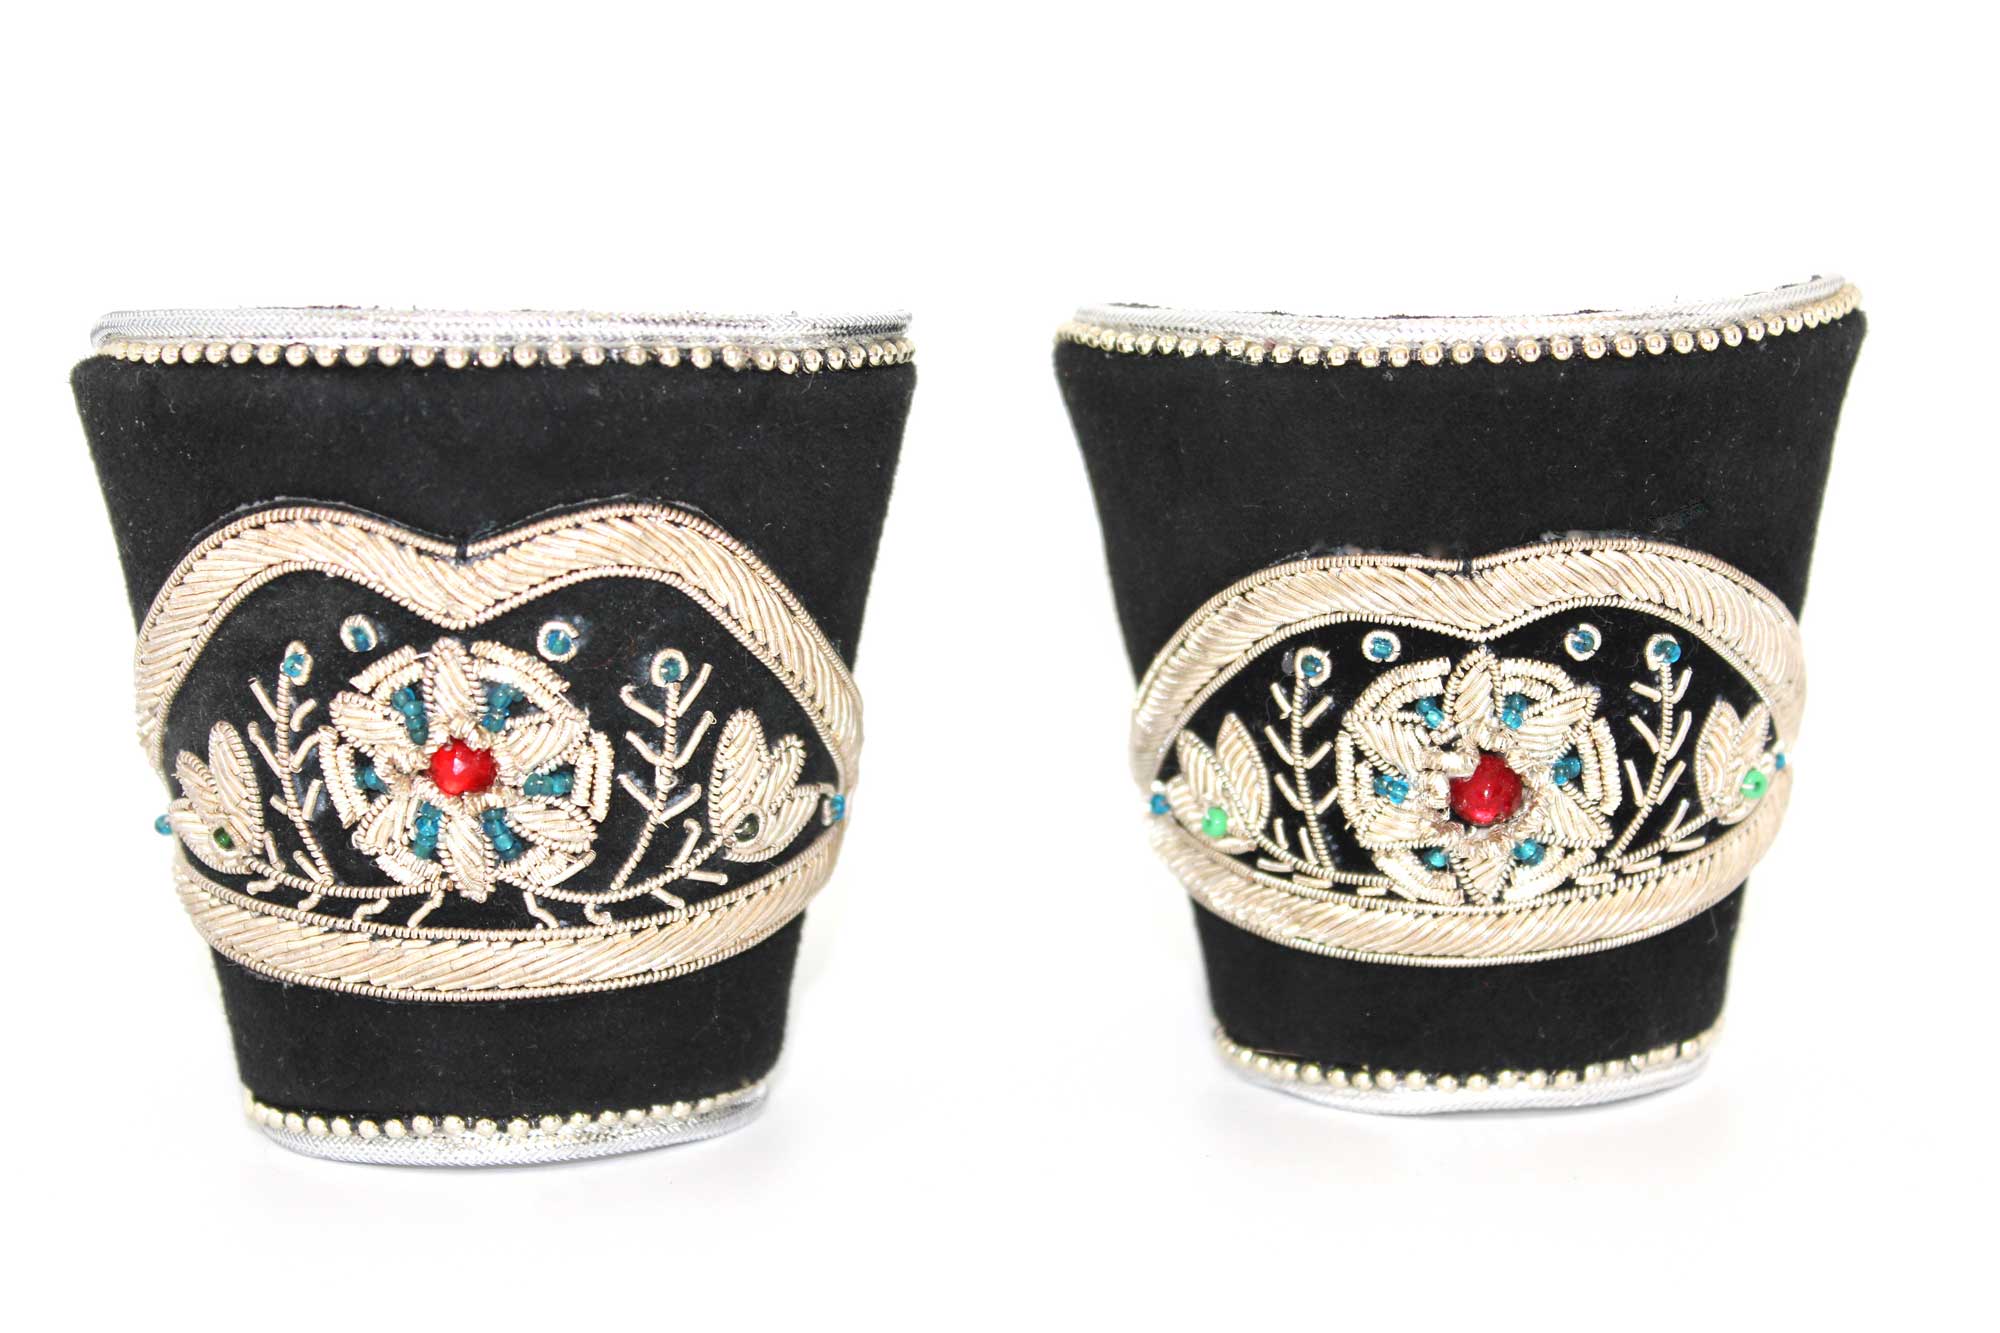 Kate Younger Designs Winged Victory Cuffs